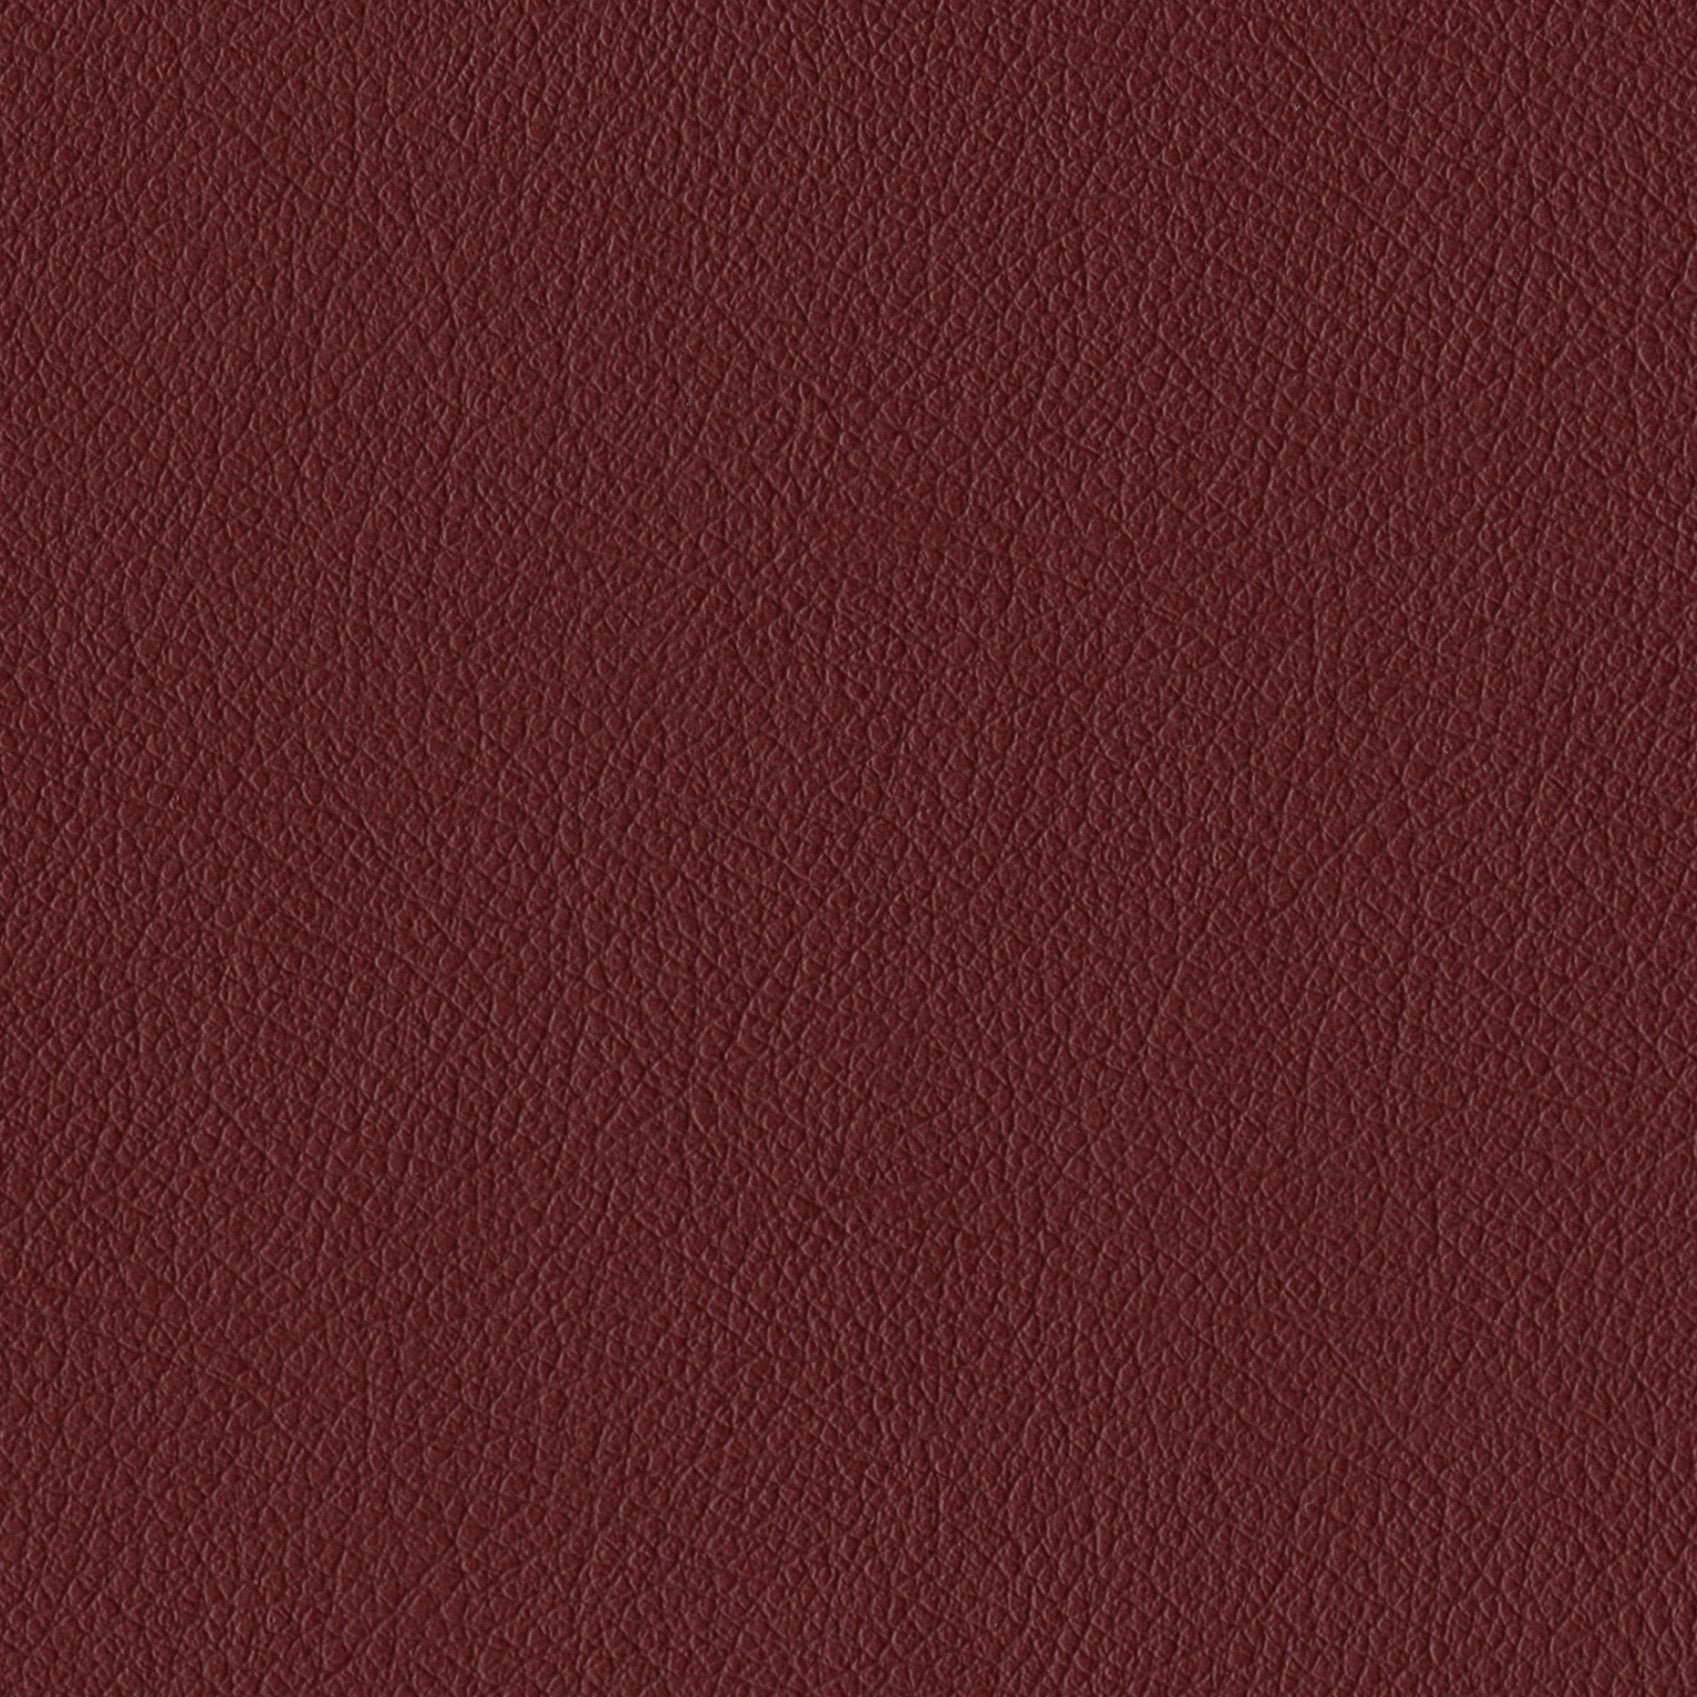    Andriali-Contract-Vinyl_Upholstery-Design-IconFR-Color-270Wine-Width-140cm